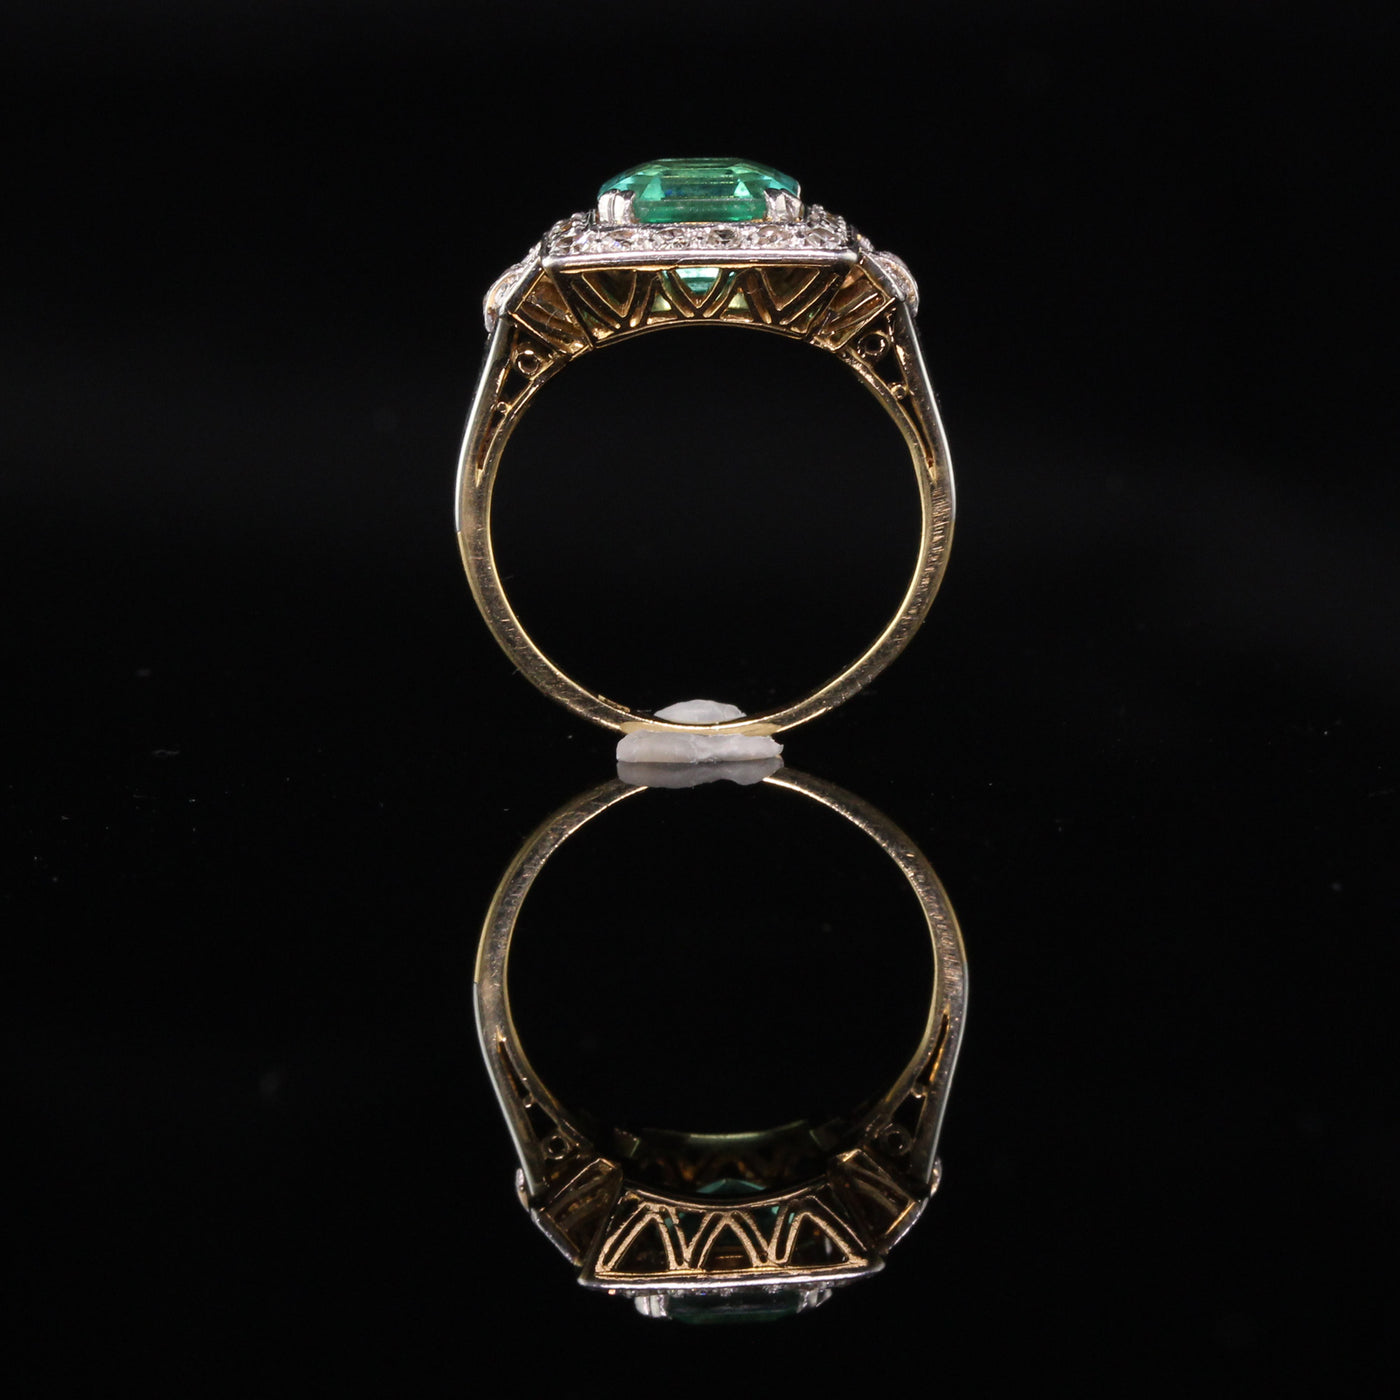 Antique Art Deco Platinum and 18K Yellow Gold Diamond and Emerald Cocktail Ring